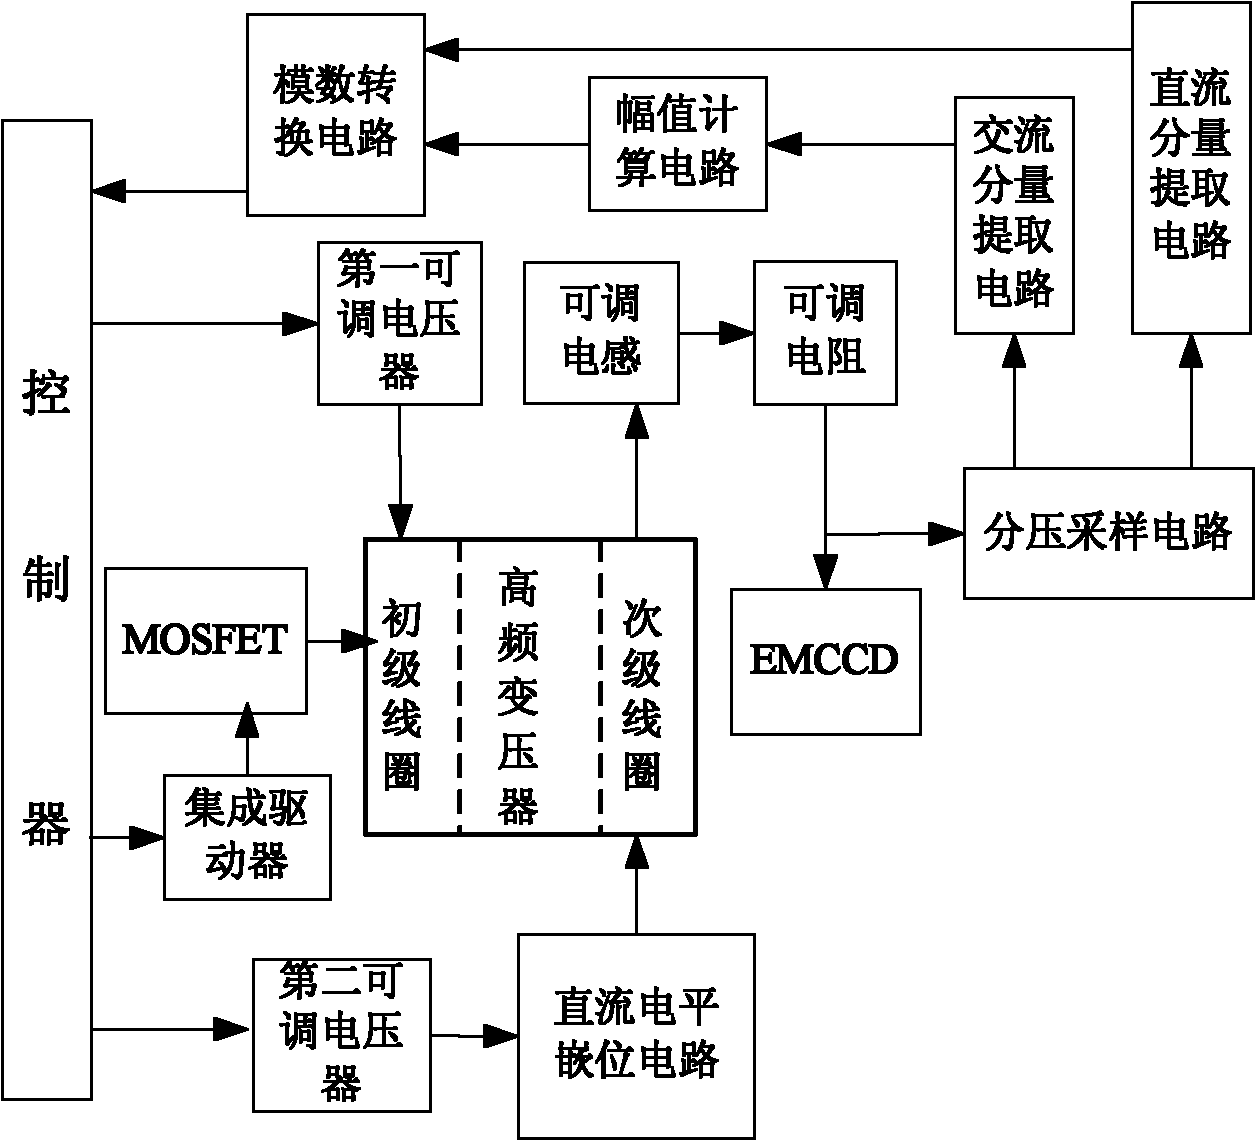 System for realizing drive of EMCCD signal by transformer